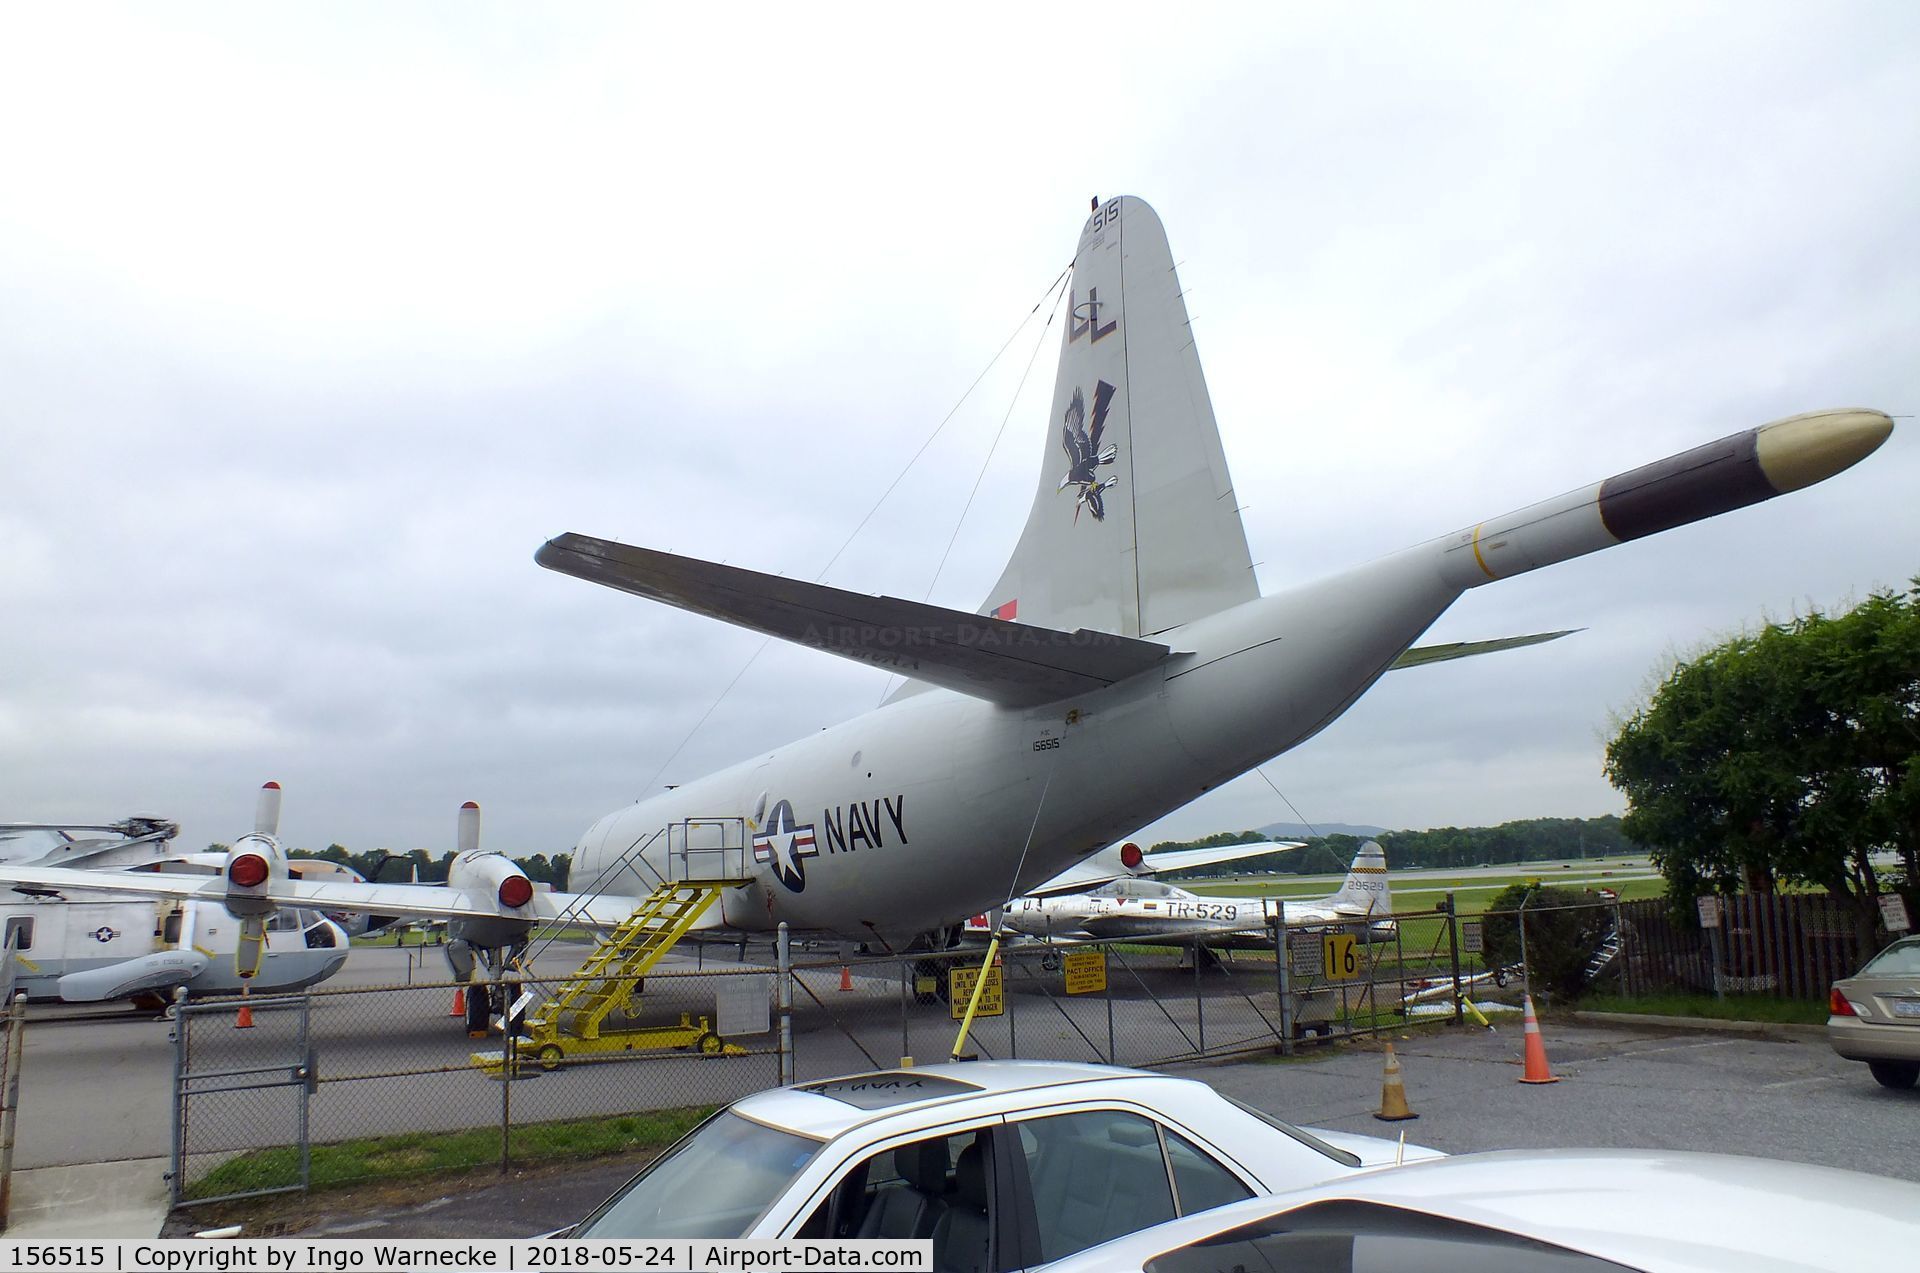 156515, 1969 Lockheed P-3C CDU Orion C/N 285A-5509, Lockheed P-3C Orion at the Hickory Aviation Museum, Hickory NC